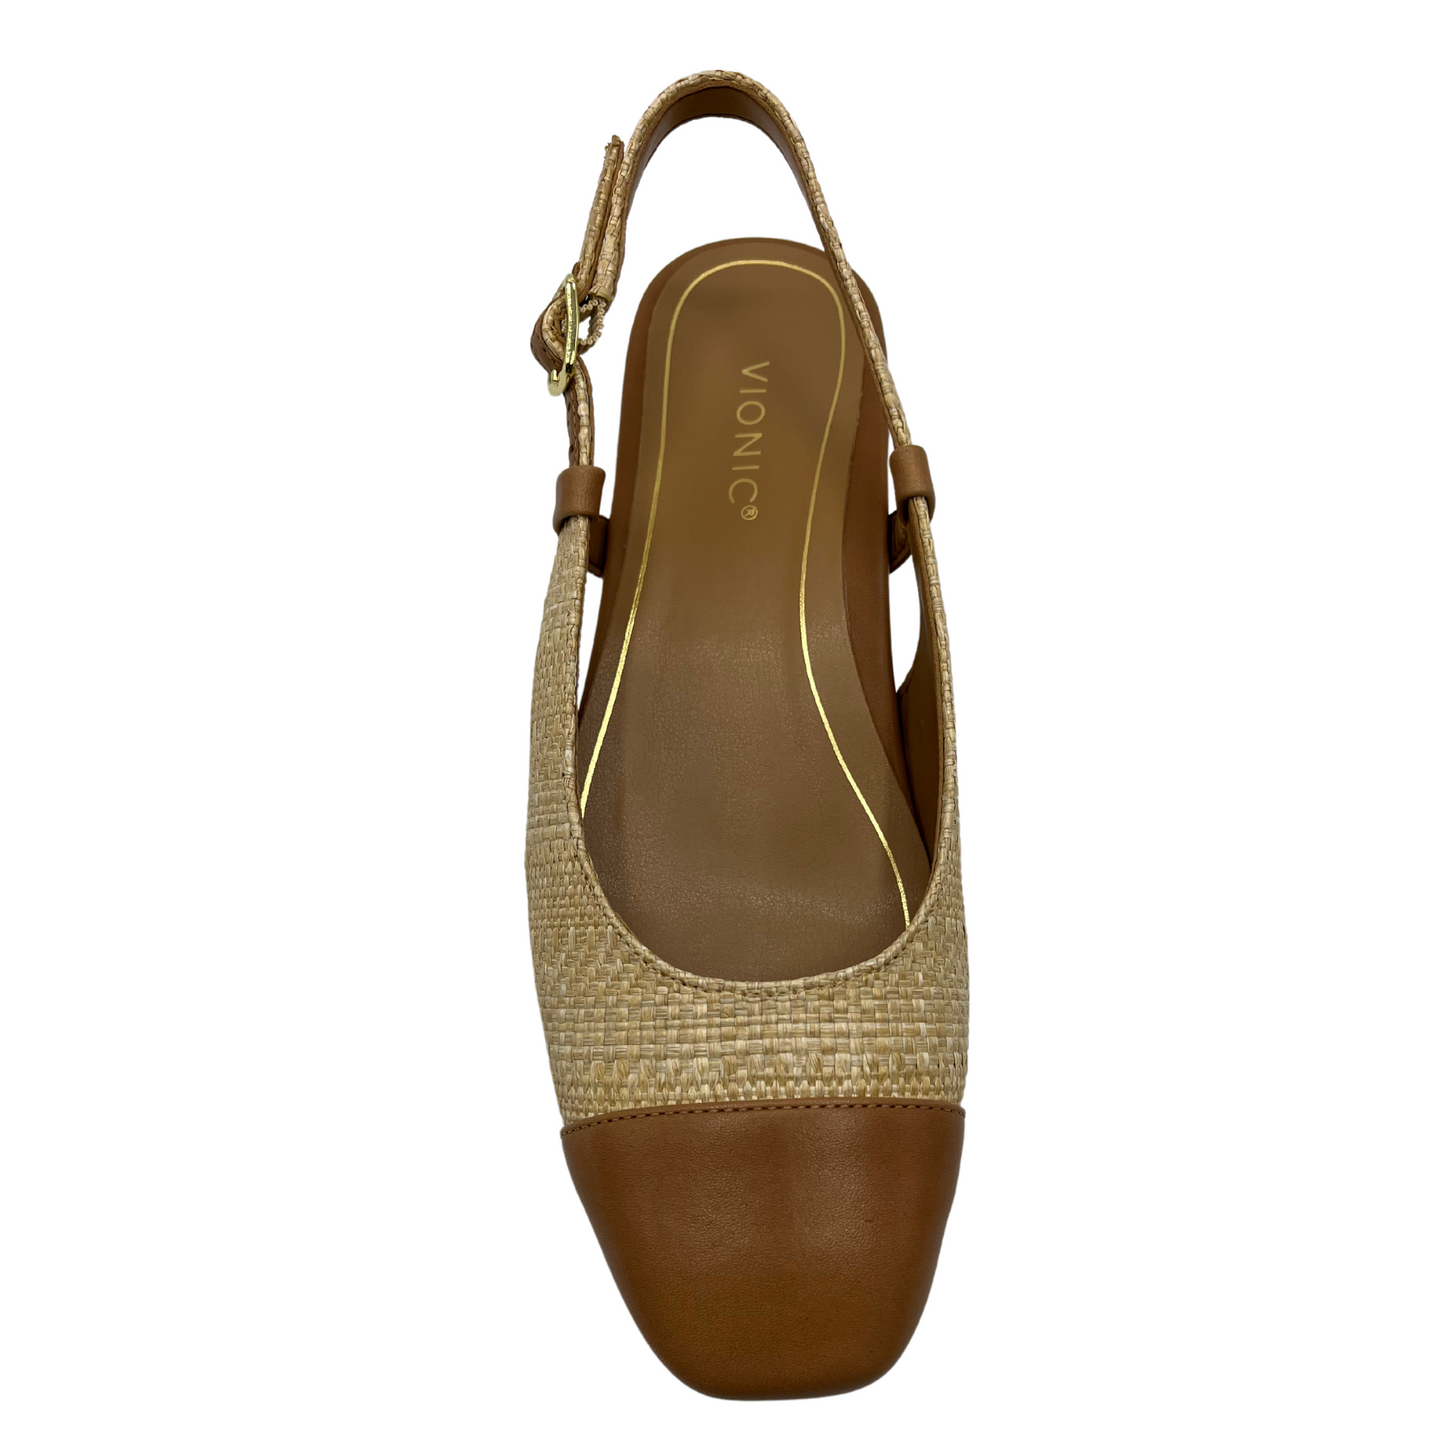 Top view of natural and beige flat shoe with slingback strap and square toe